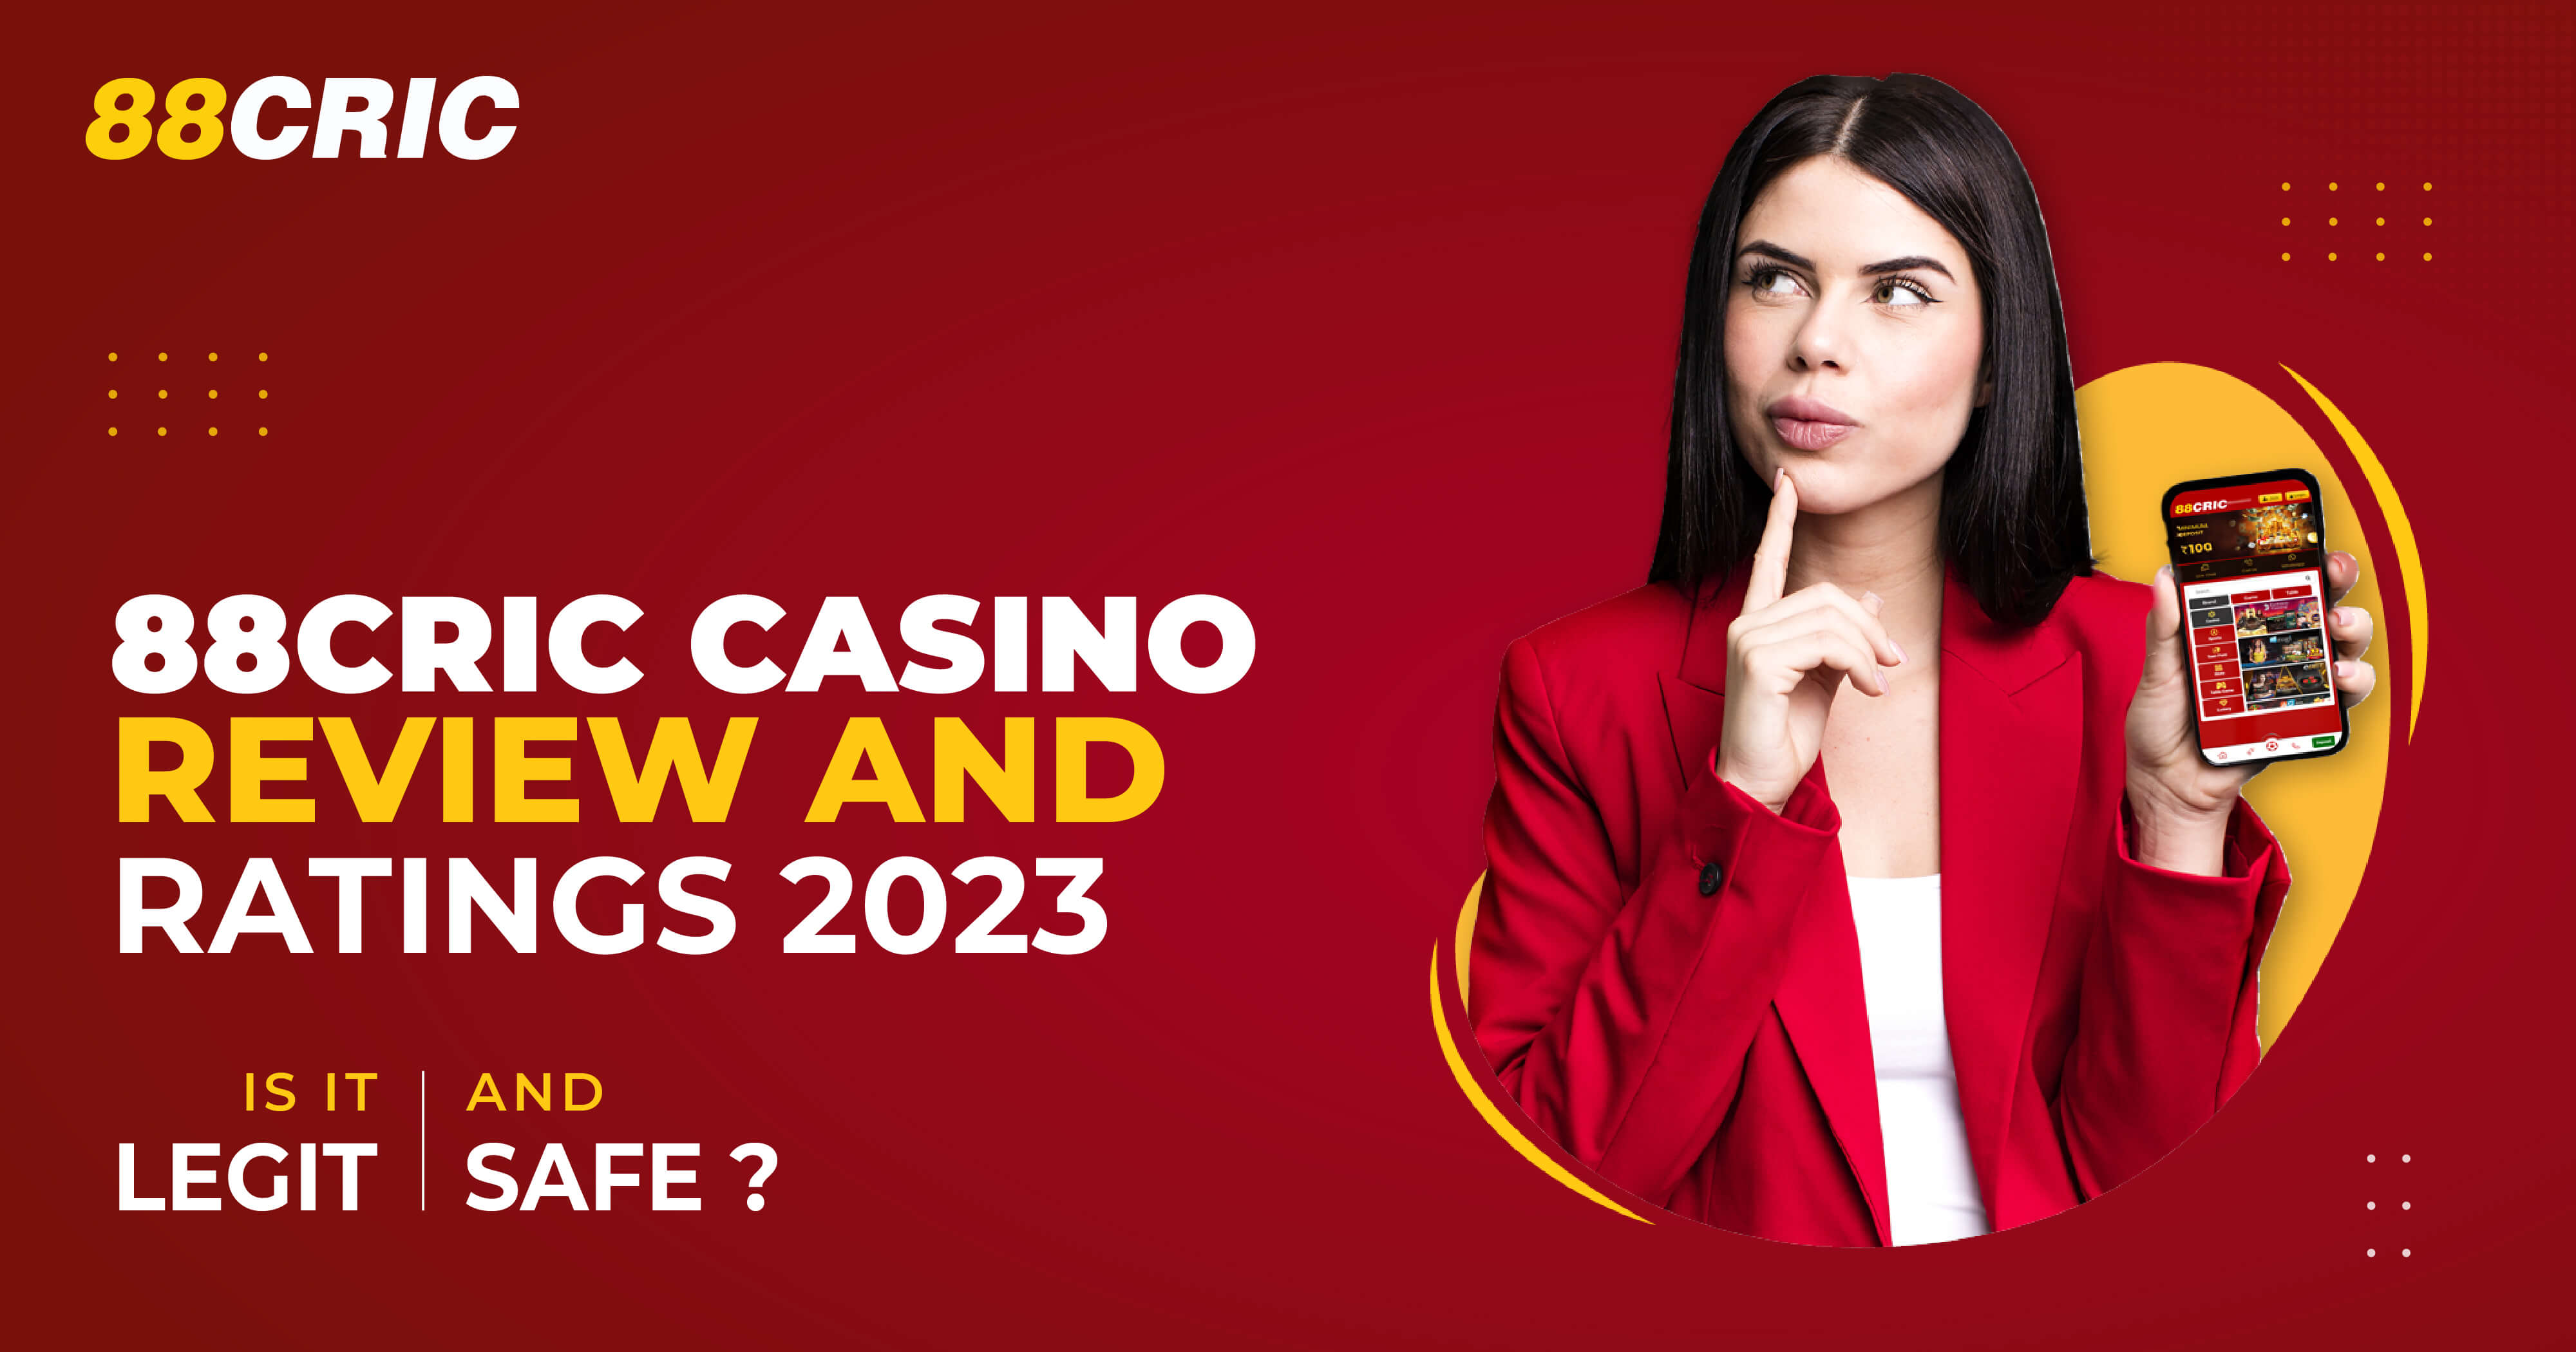 88Cric Casino Review & Ratings 2023: Is It Legit And Safe?